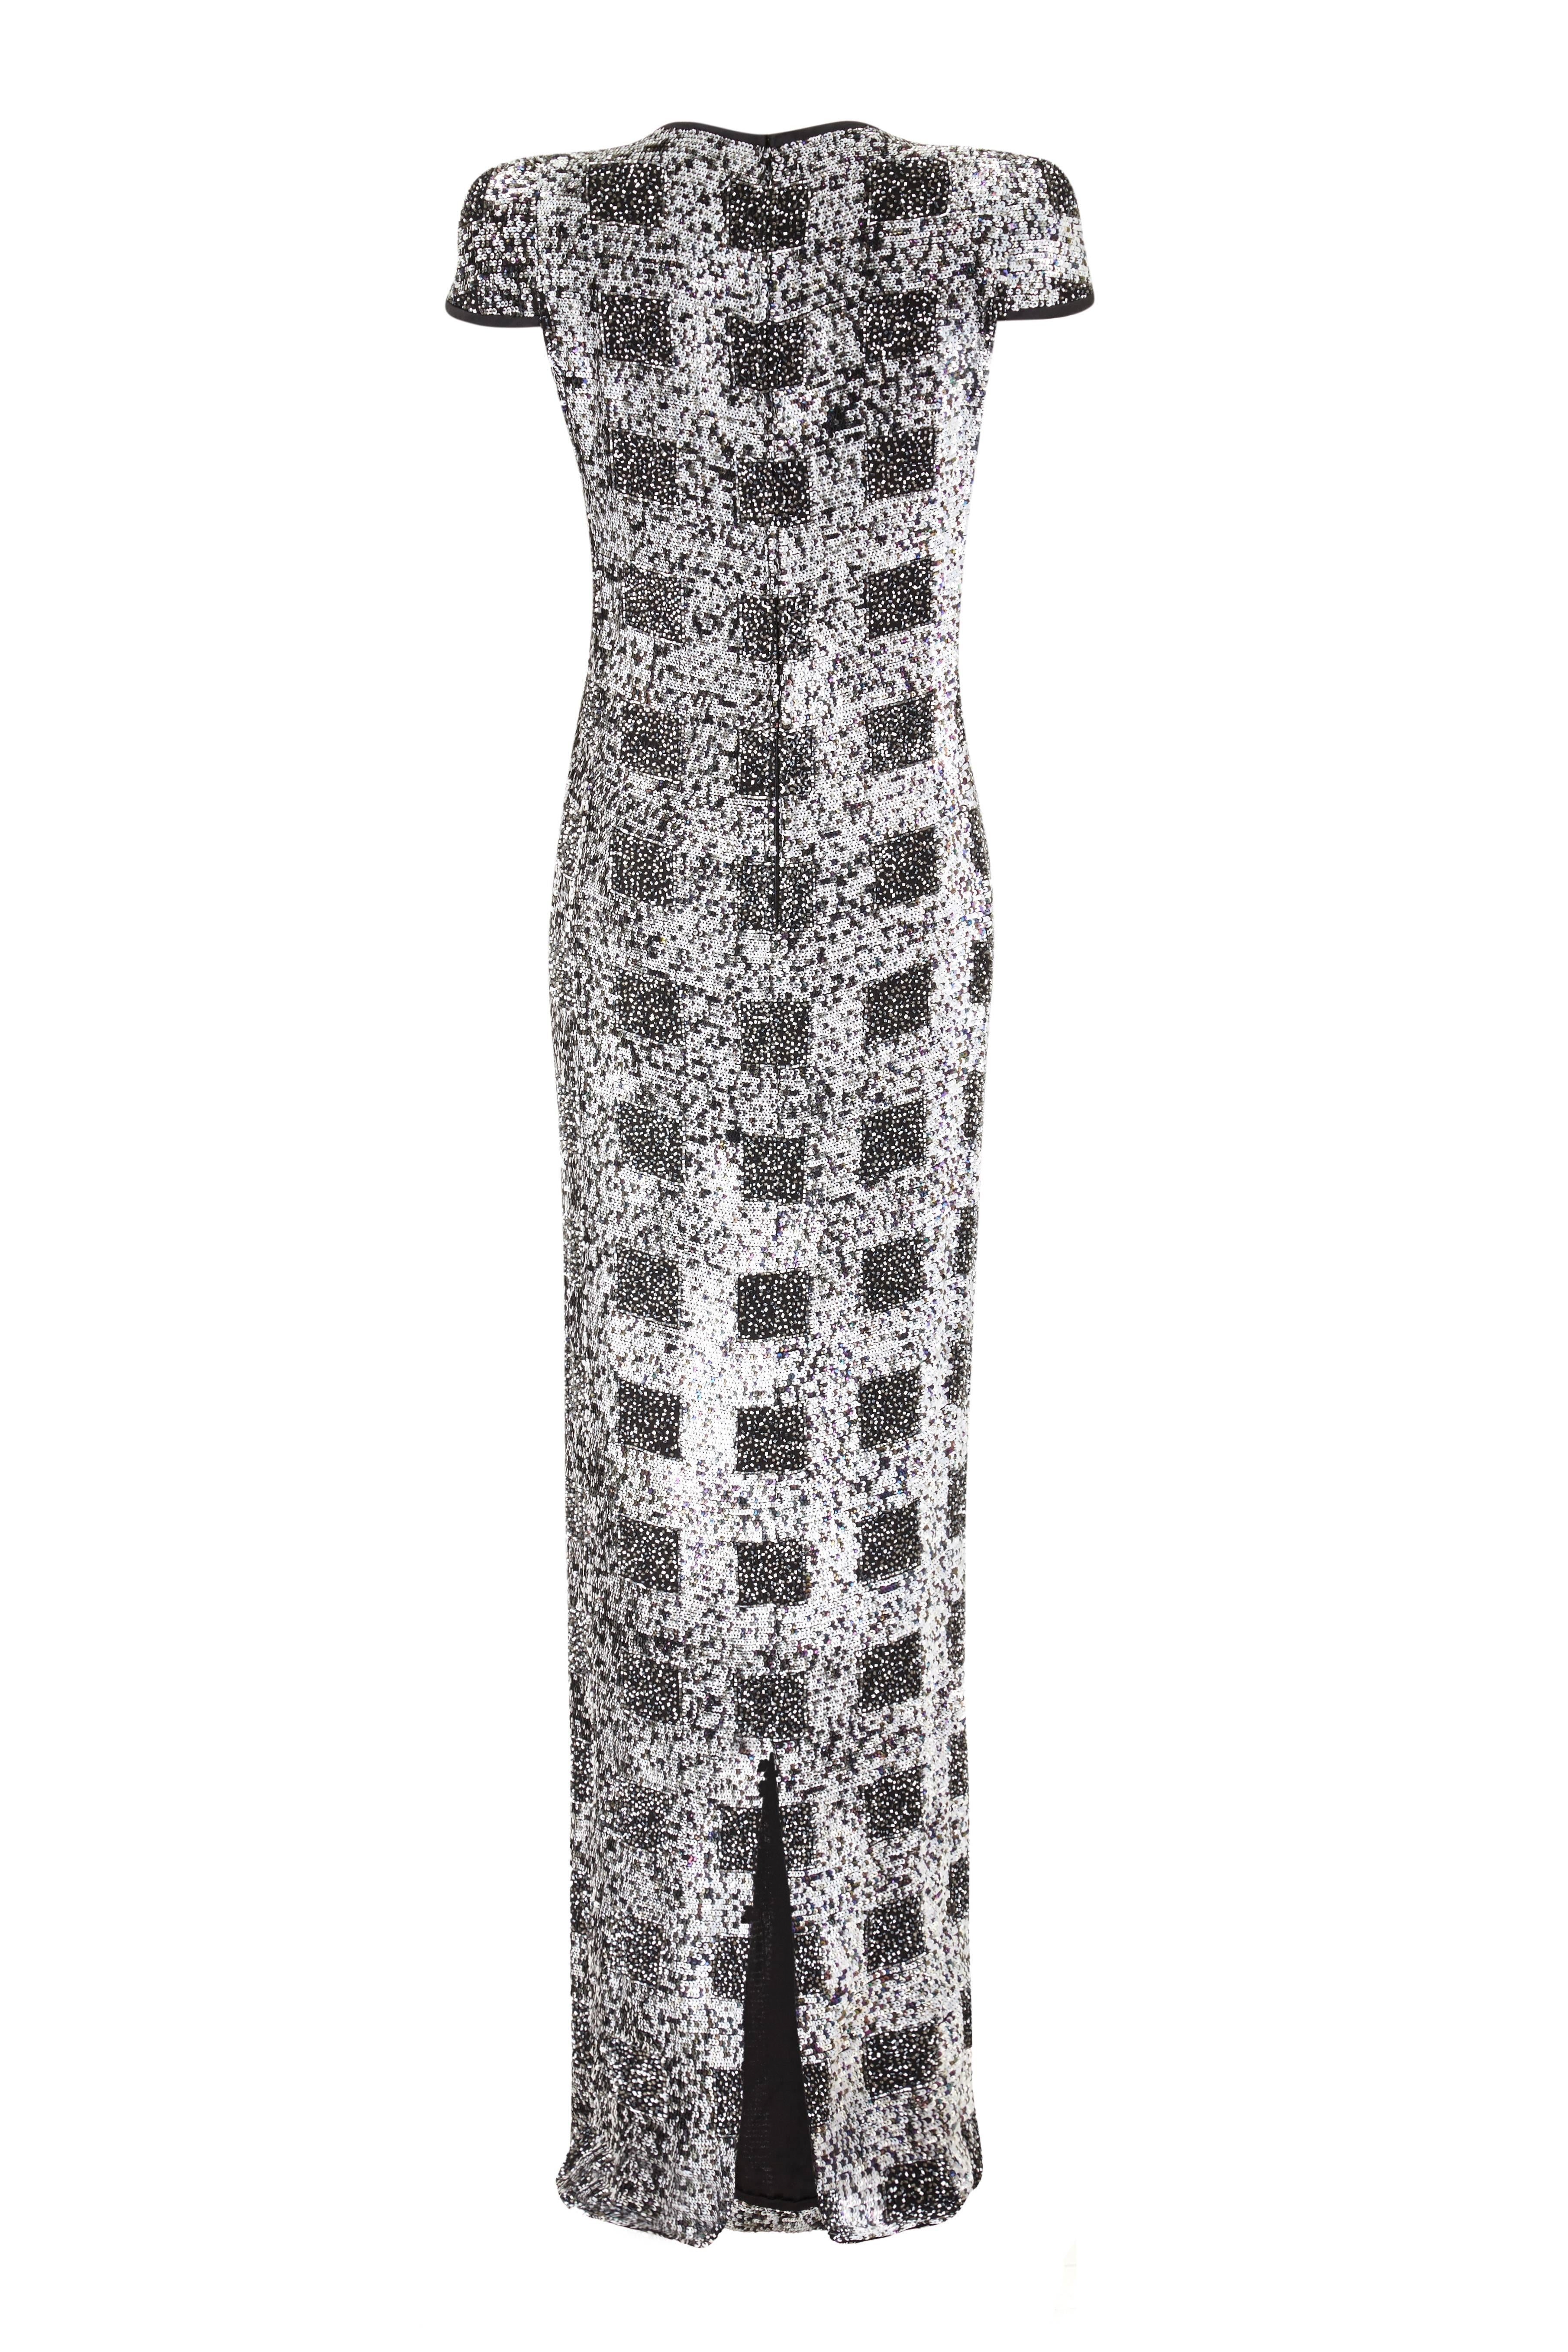 This late 1970s or early 1980s fully beaded full-length dress is from classic Italian designer Andre Laug and is of exceptional quality. This incredible dress is embellished in its entirely with monochrome and silver sequins and rocaille beadwork